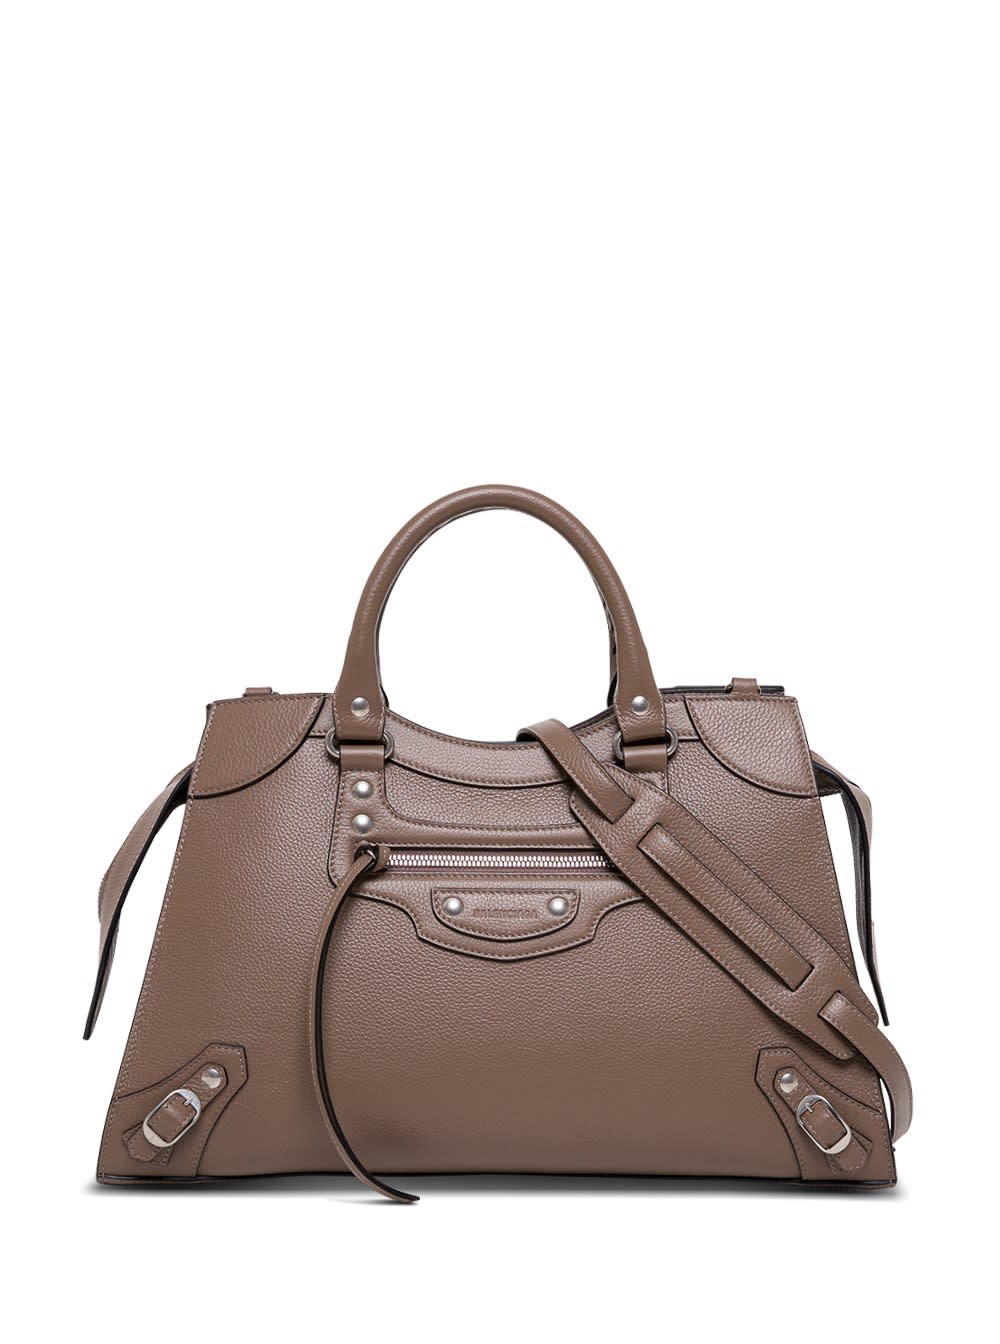 Balenciaga Neo Classic City Handbag In Taupe Colored Hammered Leather